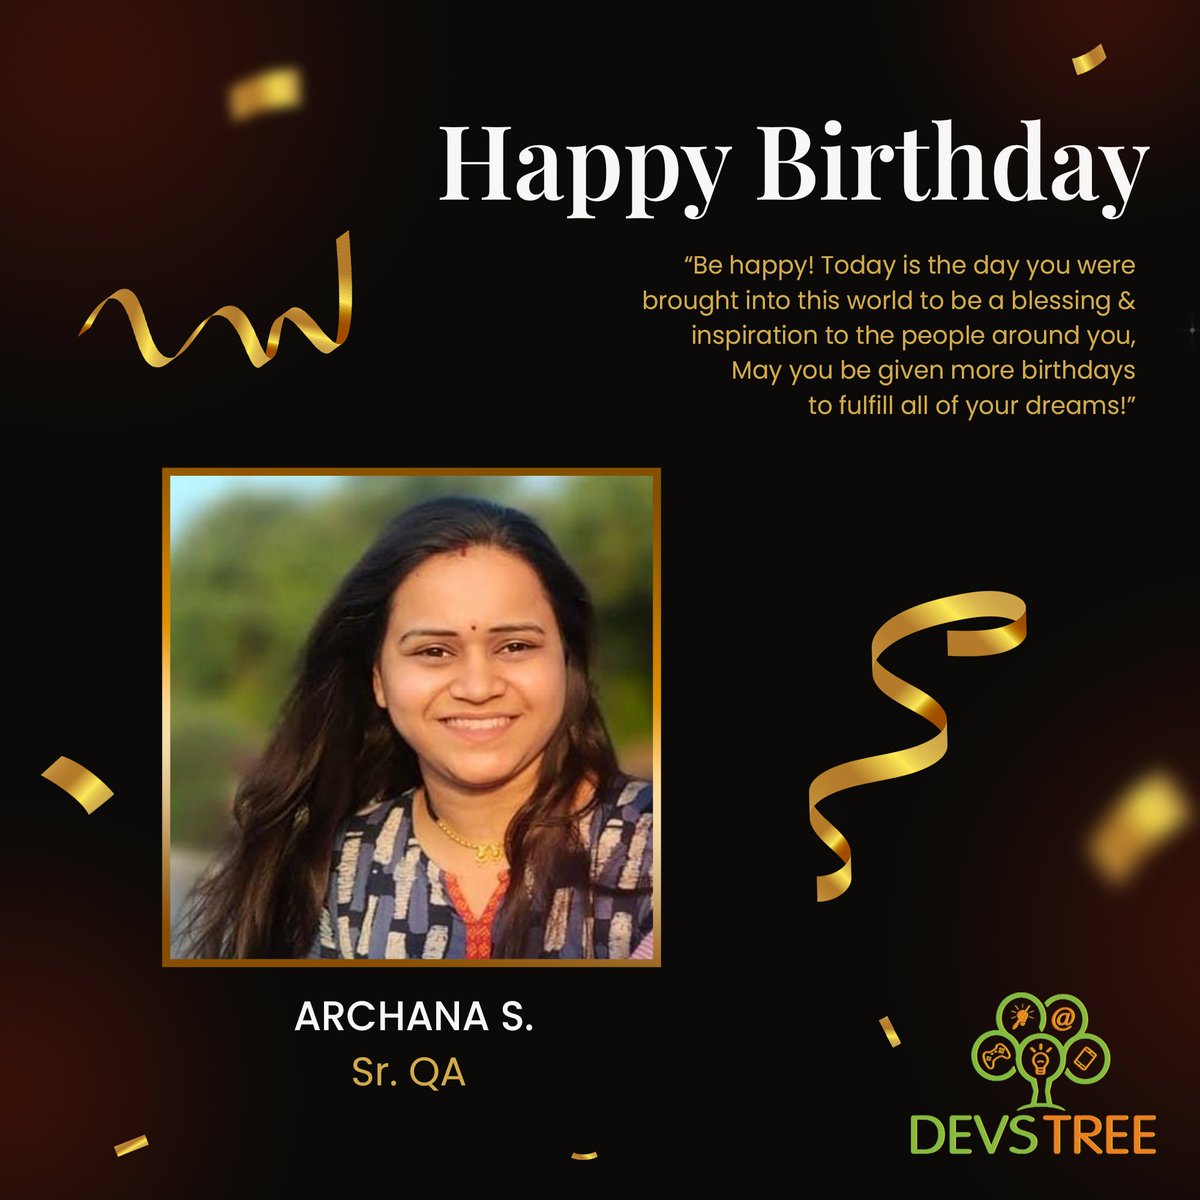 🎉 Happy birthday to our amazing Sr. QA Engineer, Archana S.! 🥳

We hope you have a wonderful day filled with 🎂 joy and 😂 laughter!

#HappyBirthday #BirthdayWishes #CelebrationTime #PartyOn #MakeAWish #CakeTime #birthdayboy #employeebirthday #devstree #india